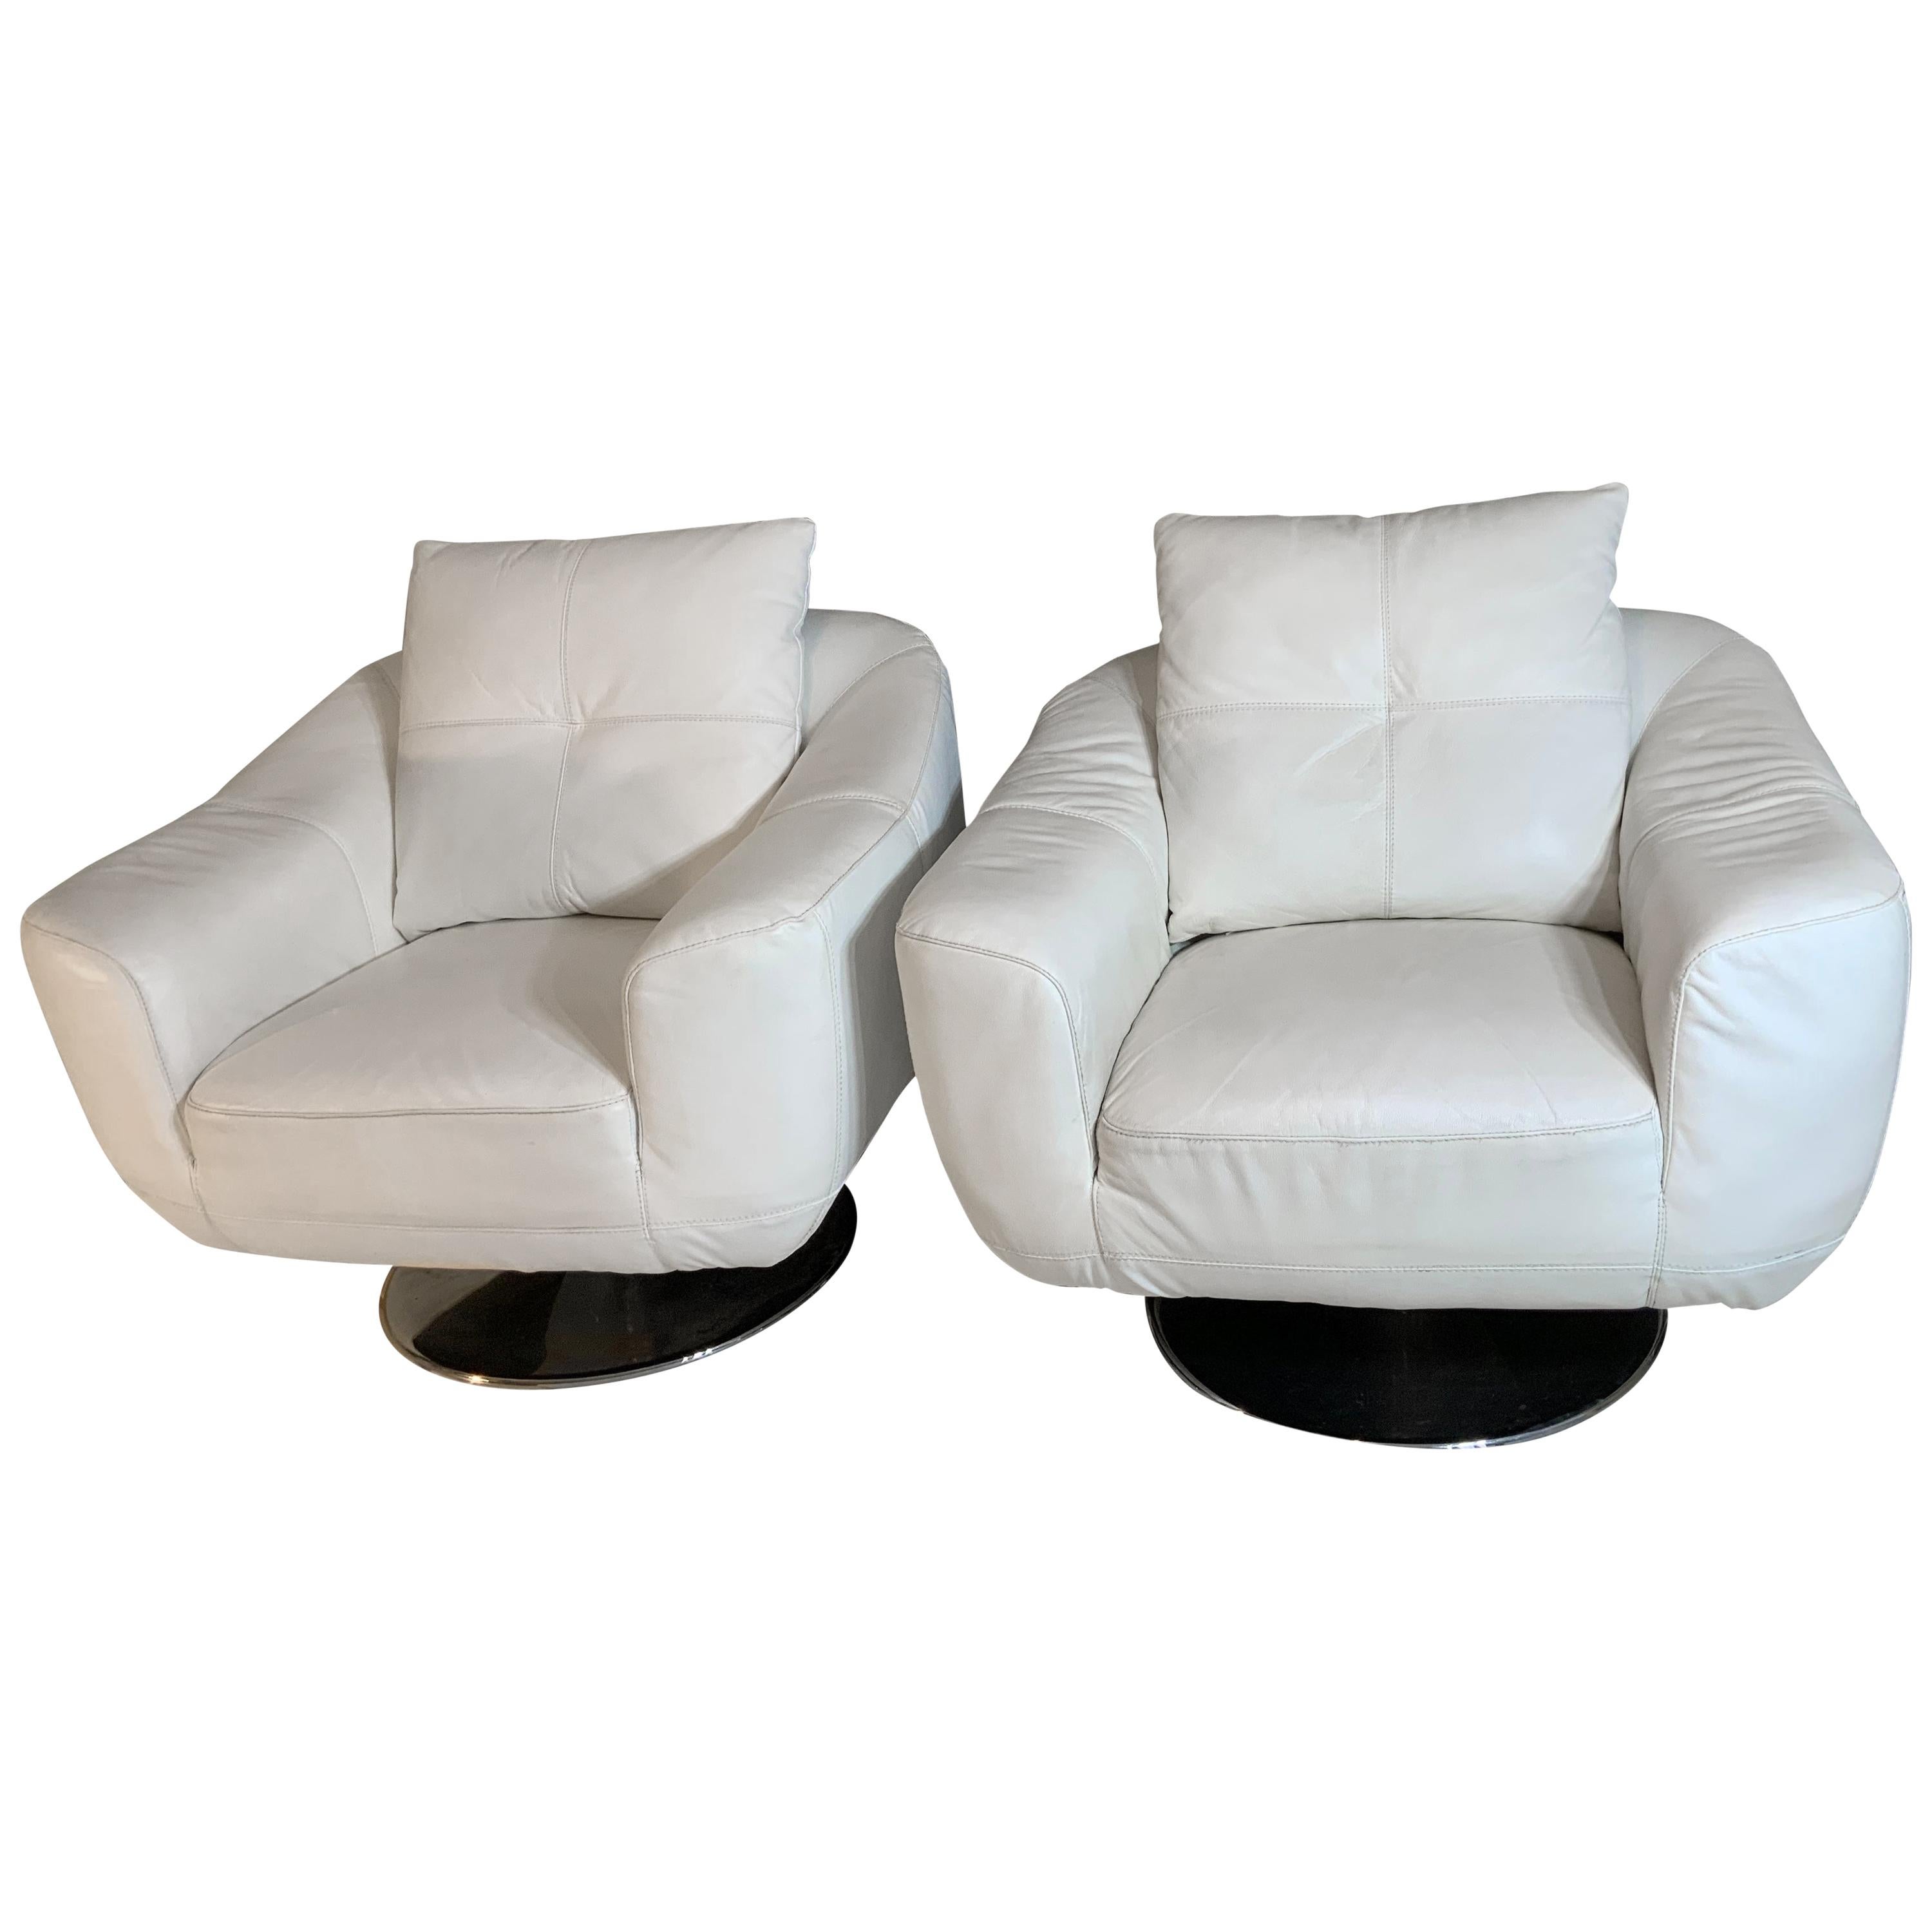 Faux Leather Swivel Chairs, White Leather Swivel Recliner